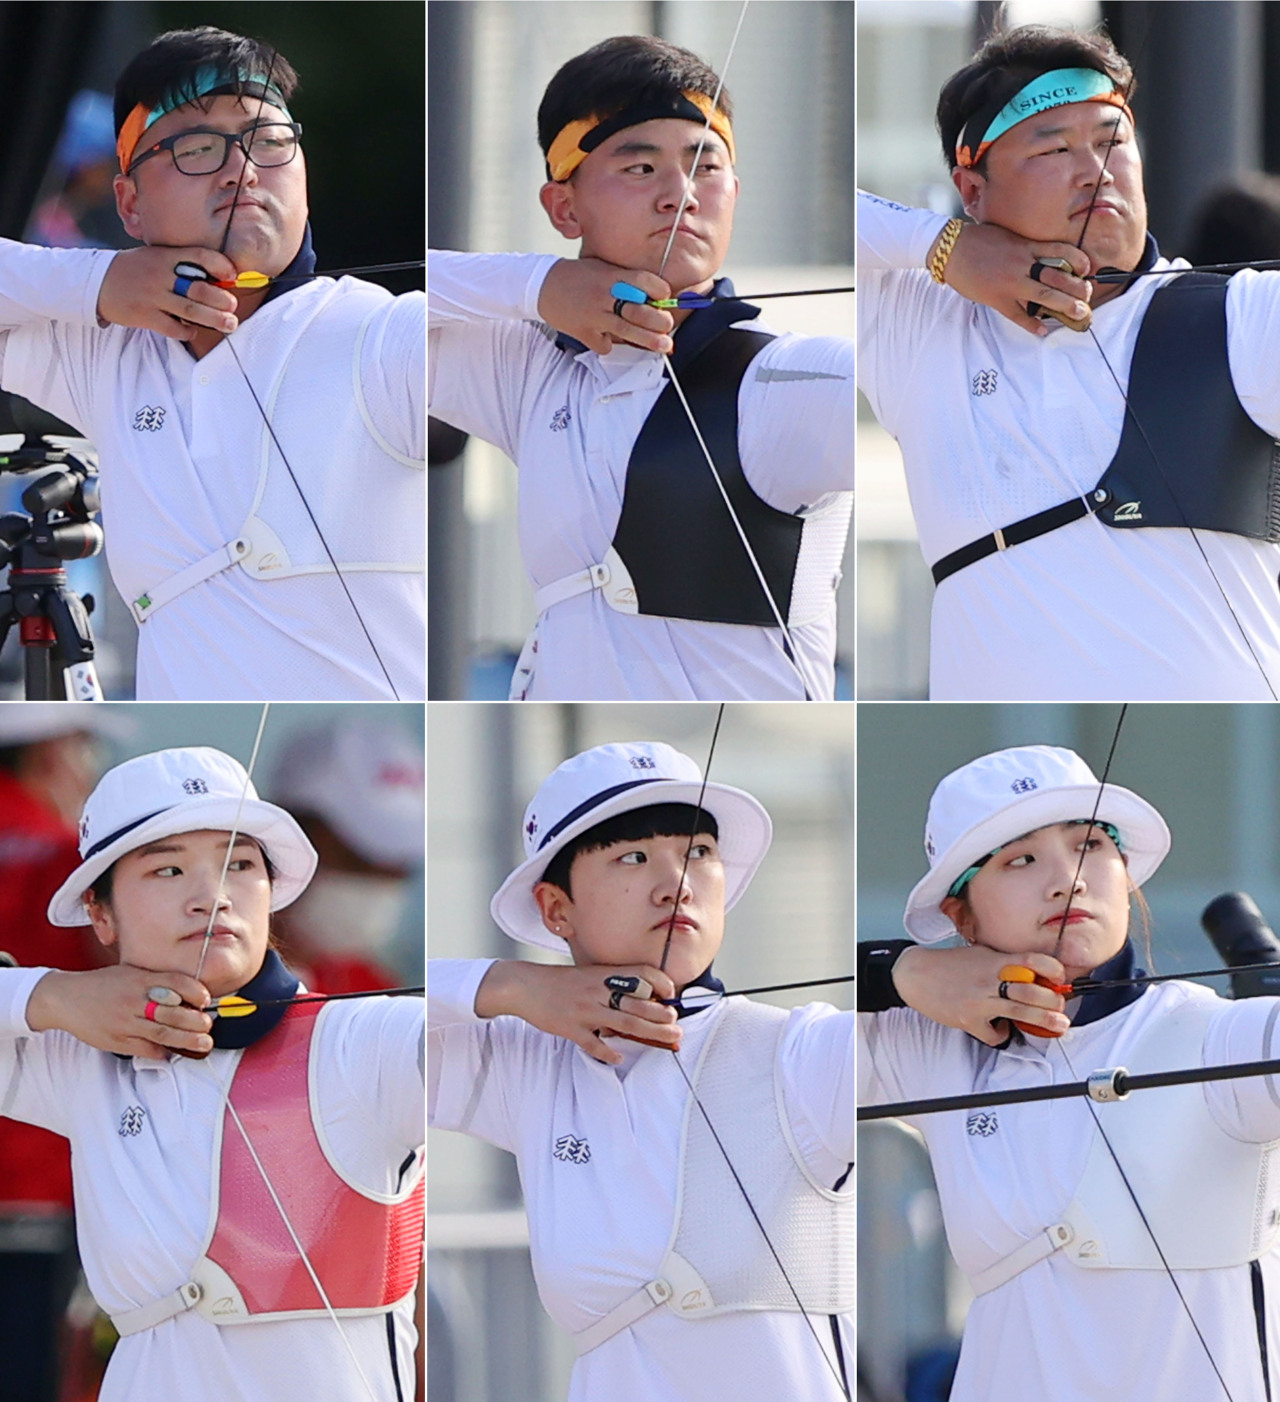 South Korean archers train for the Tokyo Olympics at Yumenoshima Archery Field in Tokyo on Tuesday. Clockwise from top left are Kim Woo-jin, Kim Je-deok, Oh Jin-hyek, Jang Min-hee, An San and Kang Chae-young. (Yonhap)